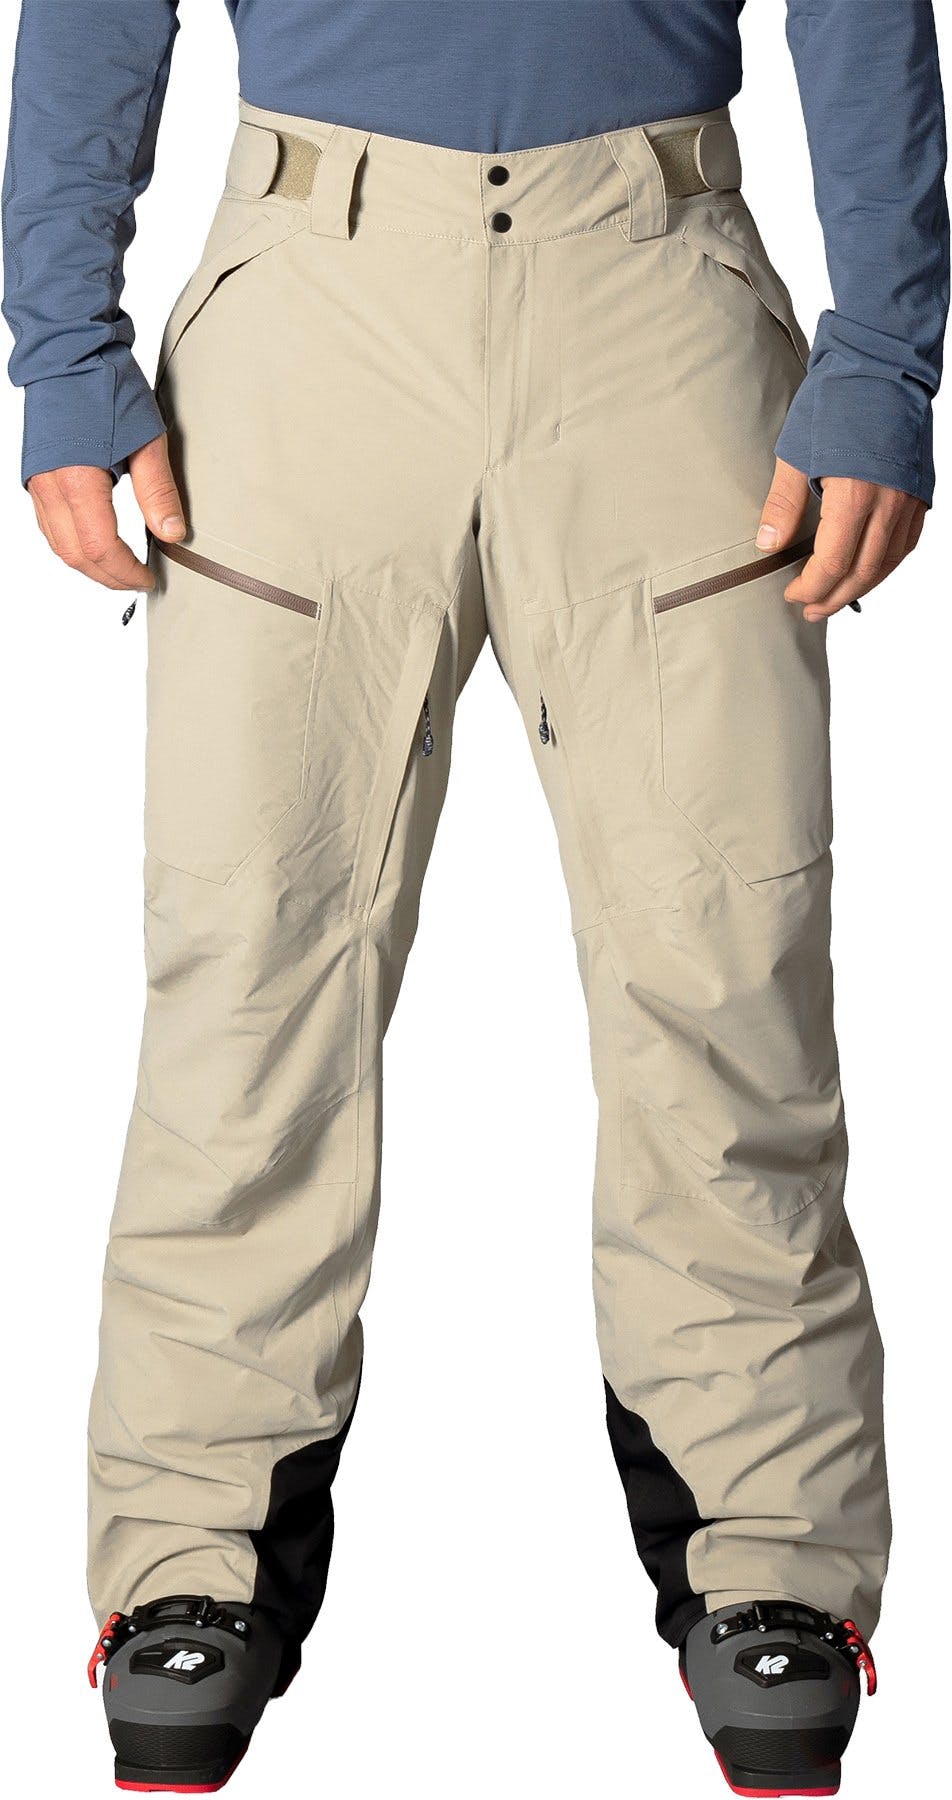 Product image for Exodus Pant - Men's